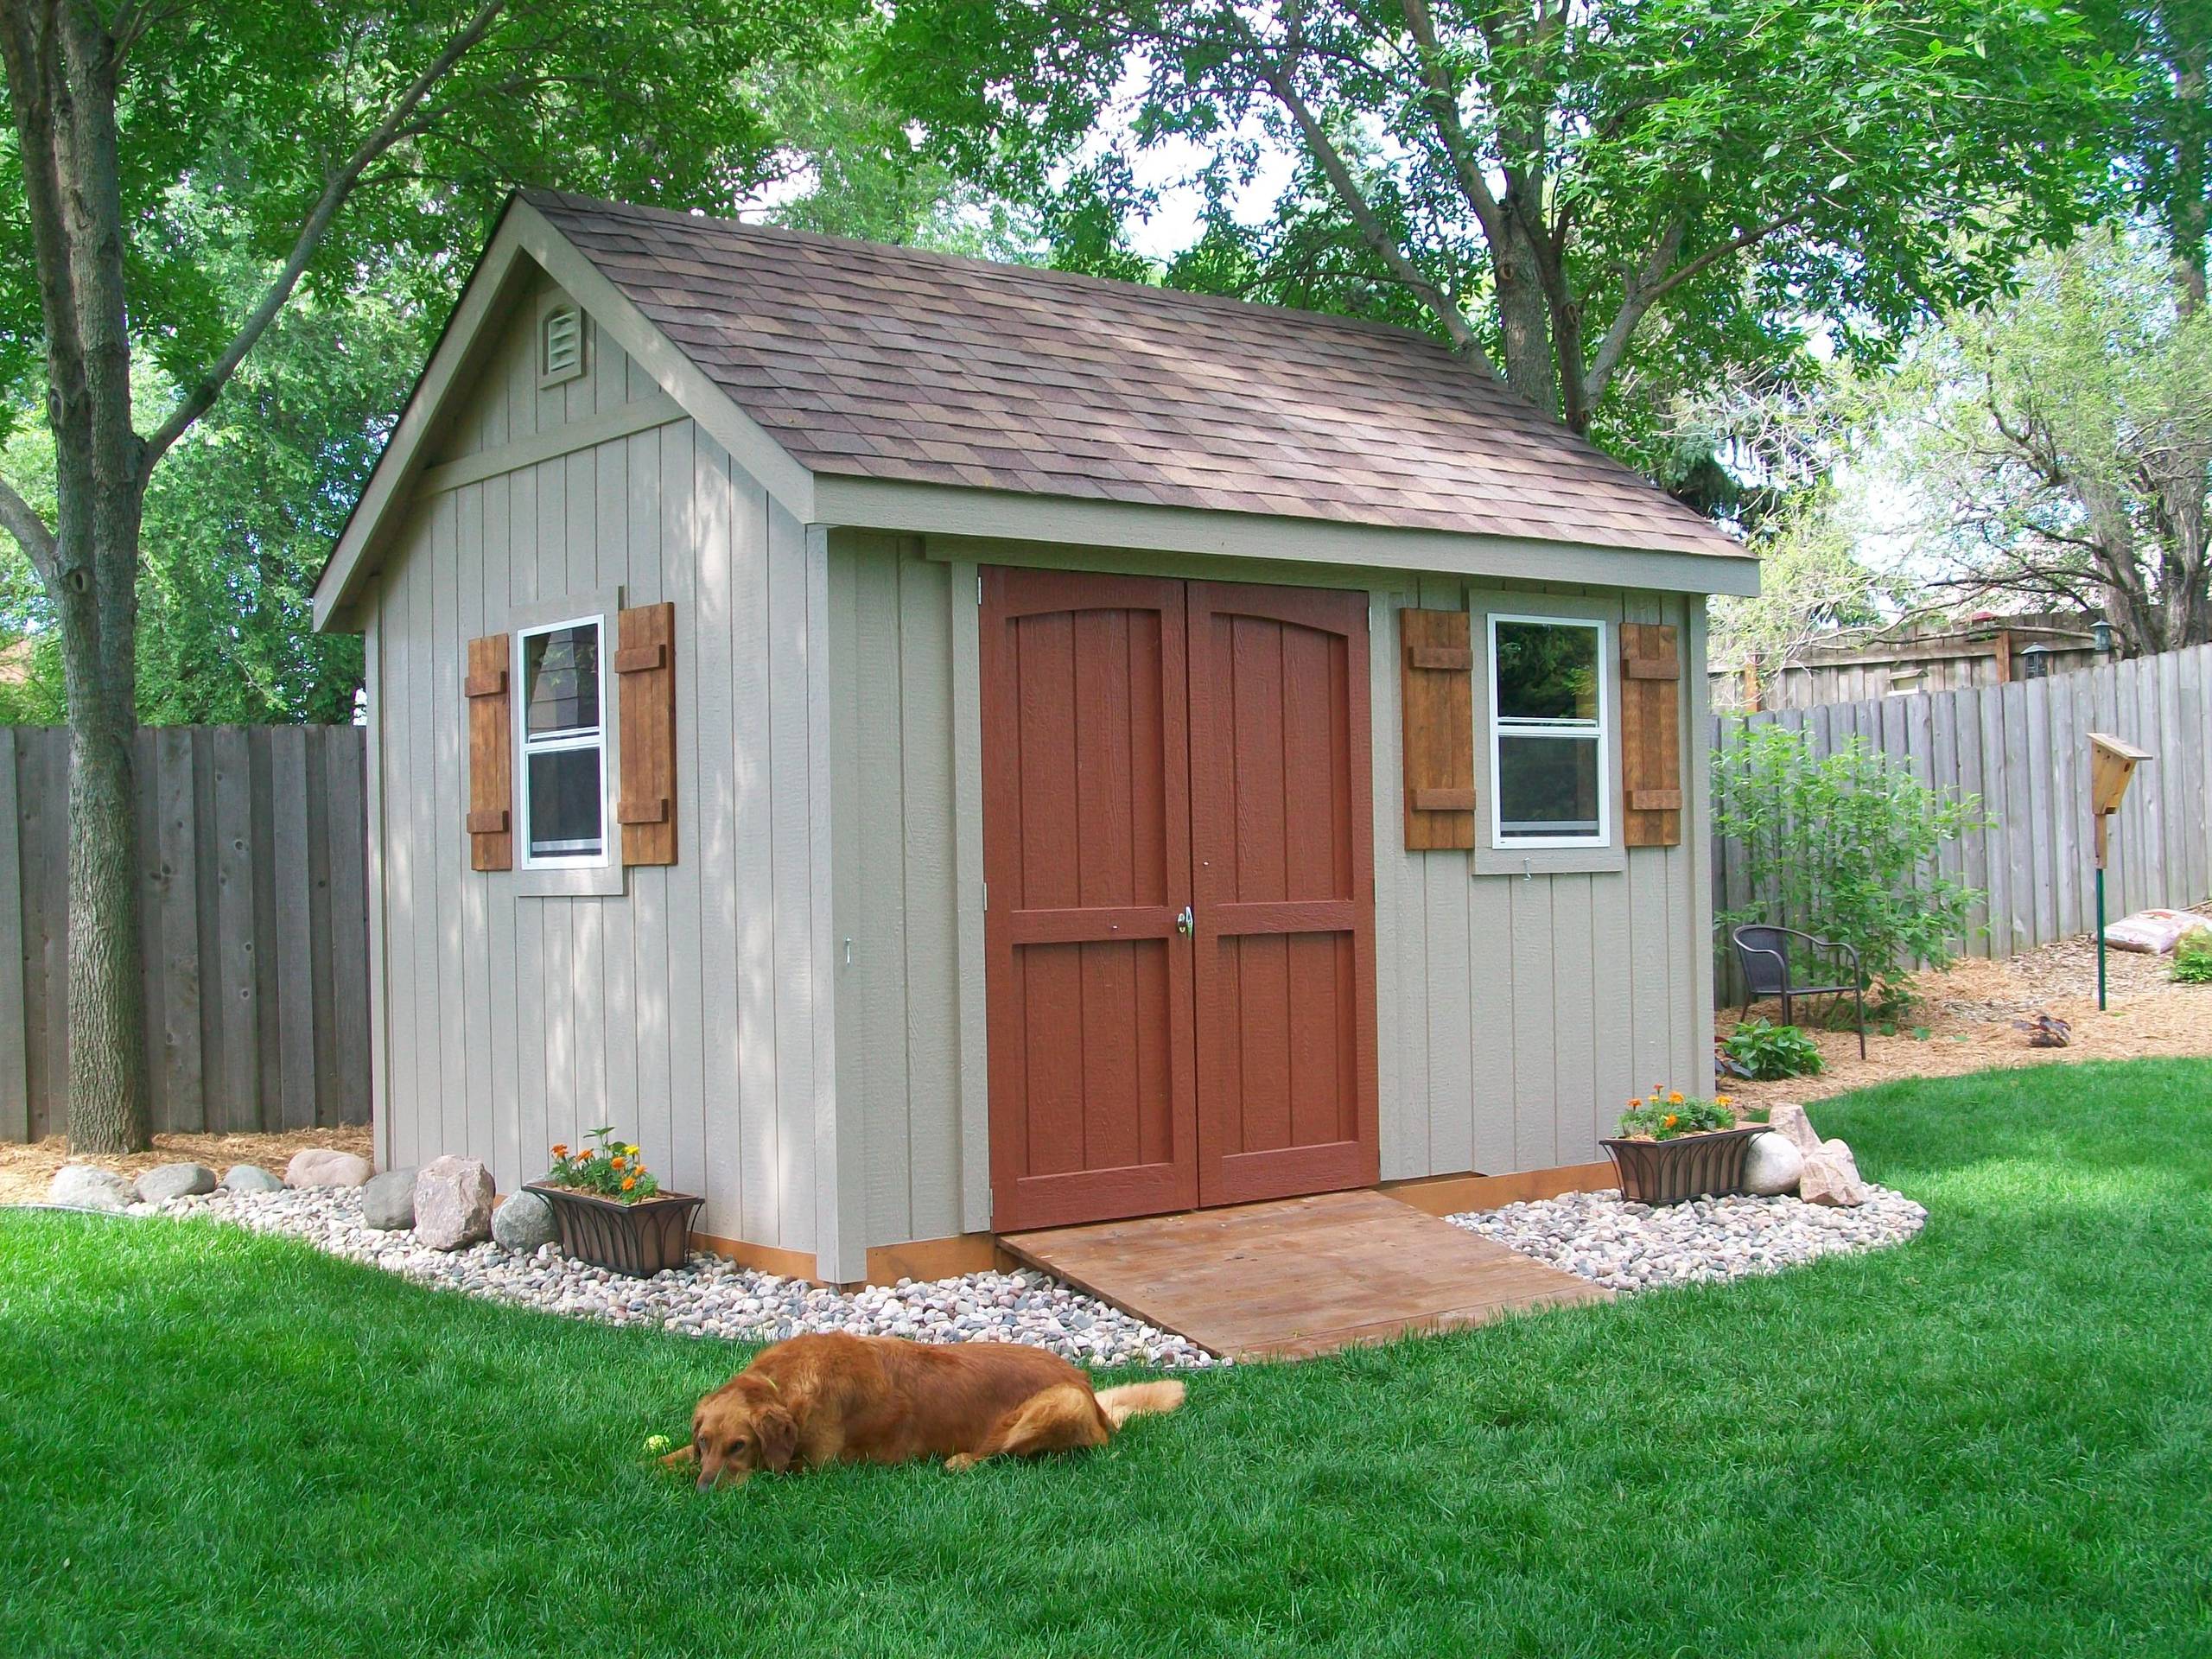 75 detached garden shed ideas you'll love - august, 2023 | houzz